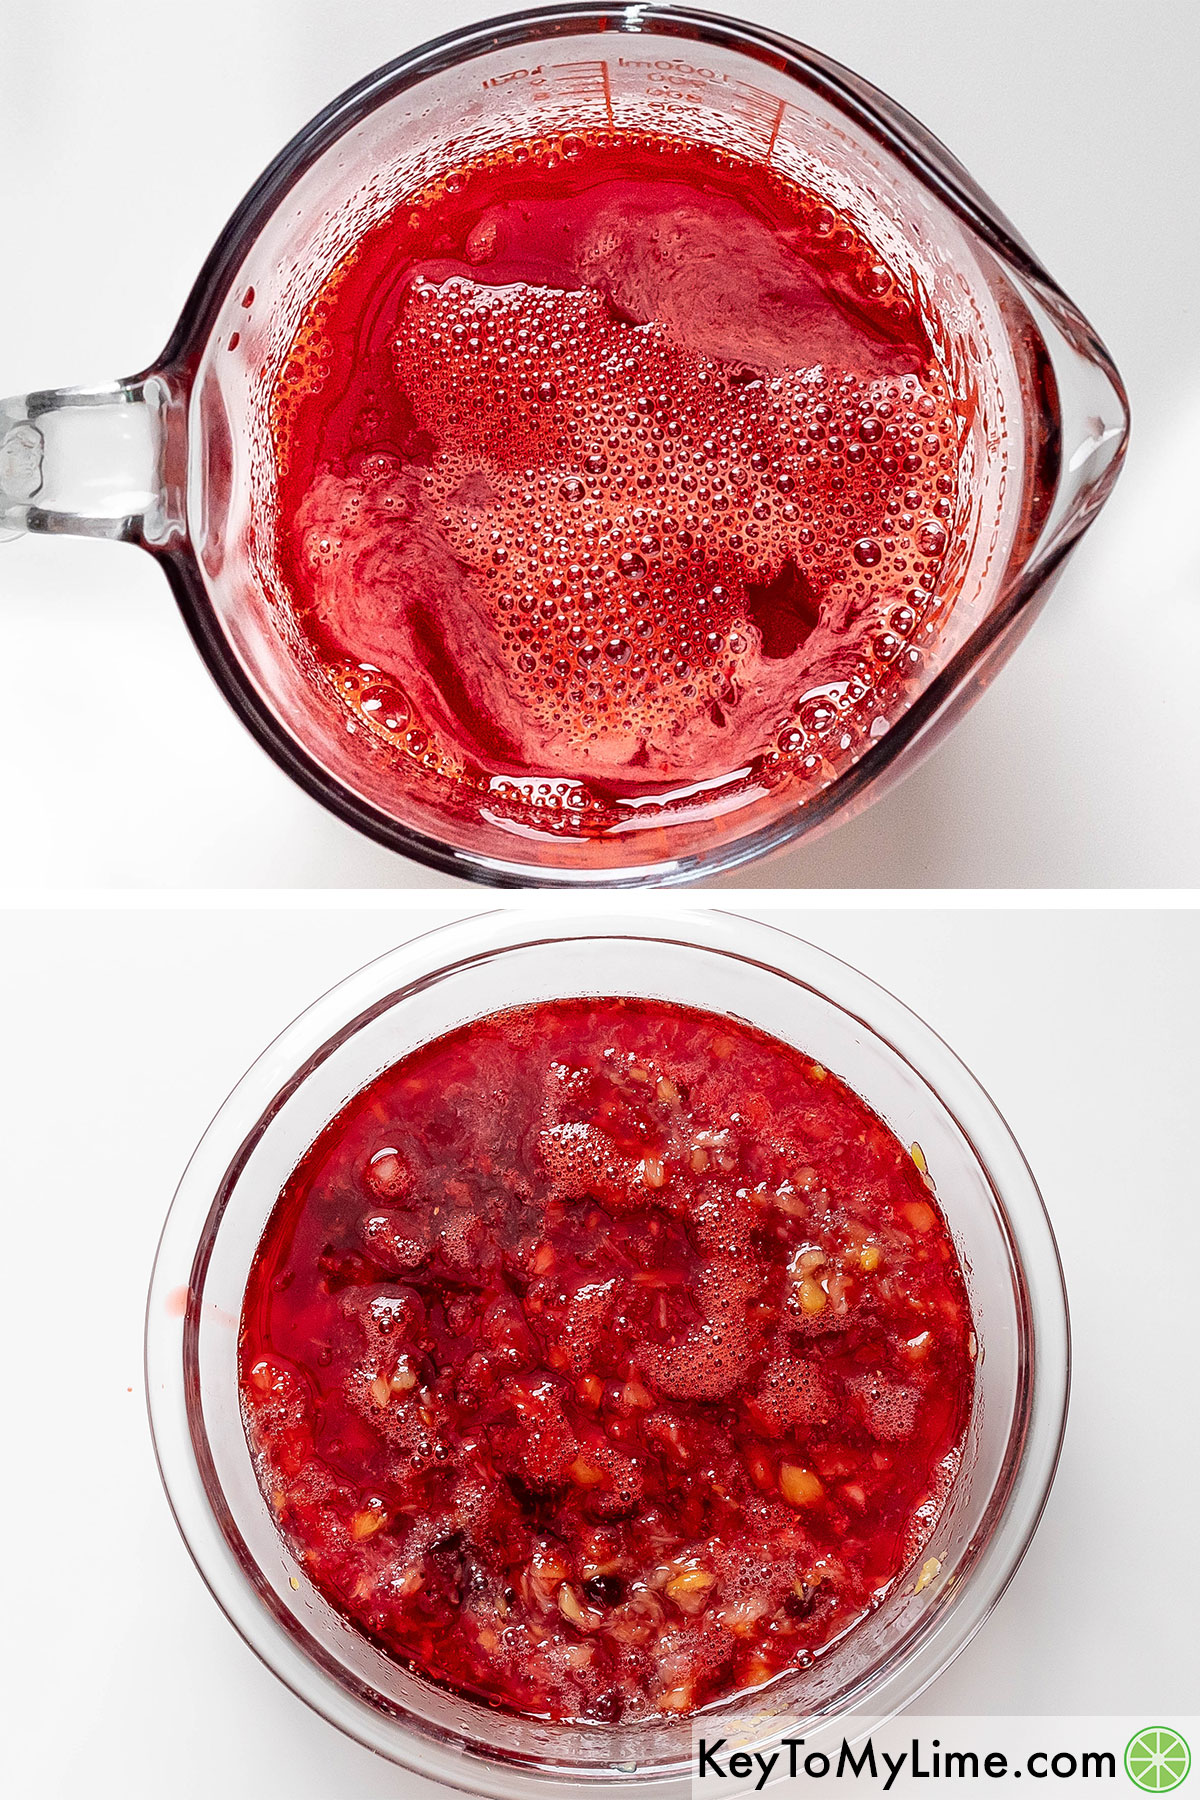 Mixing crushed pineapple and cranberry sauce into initial jello mixture.